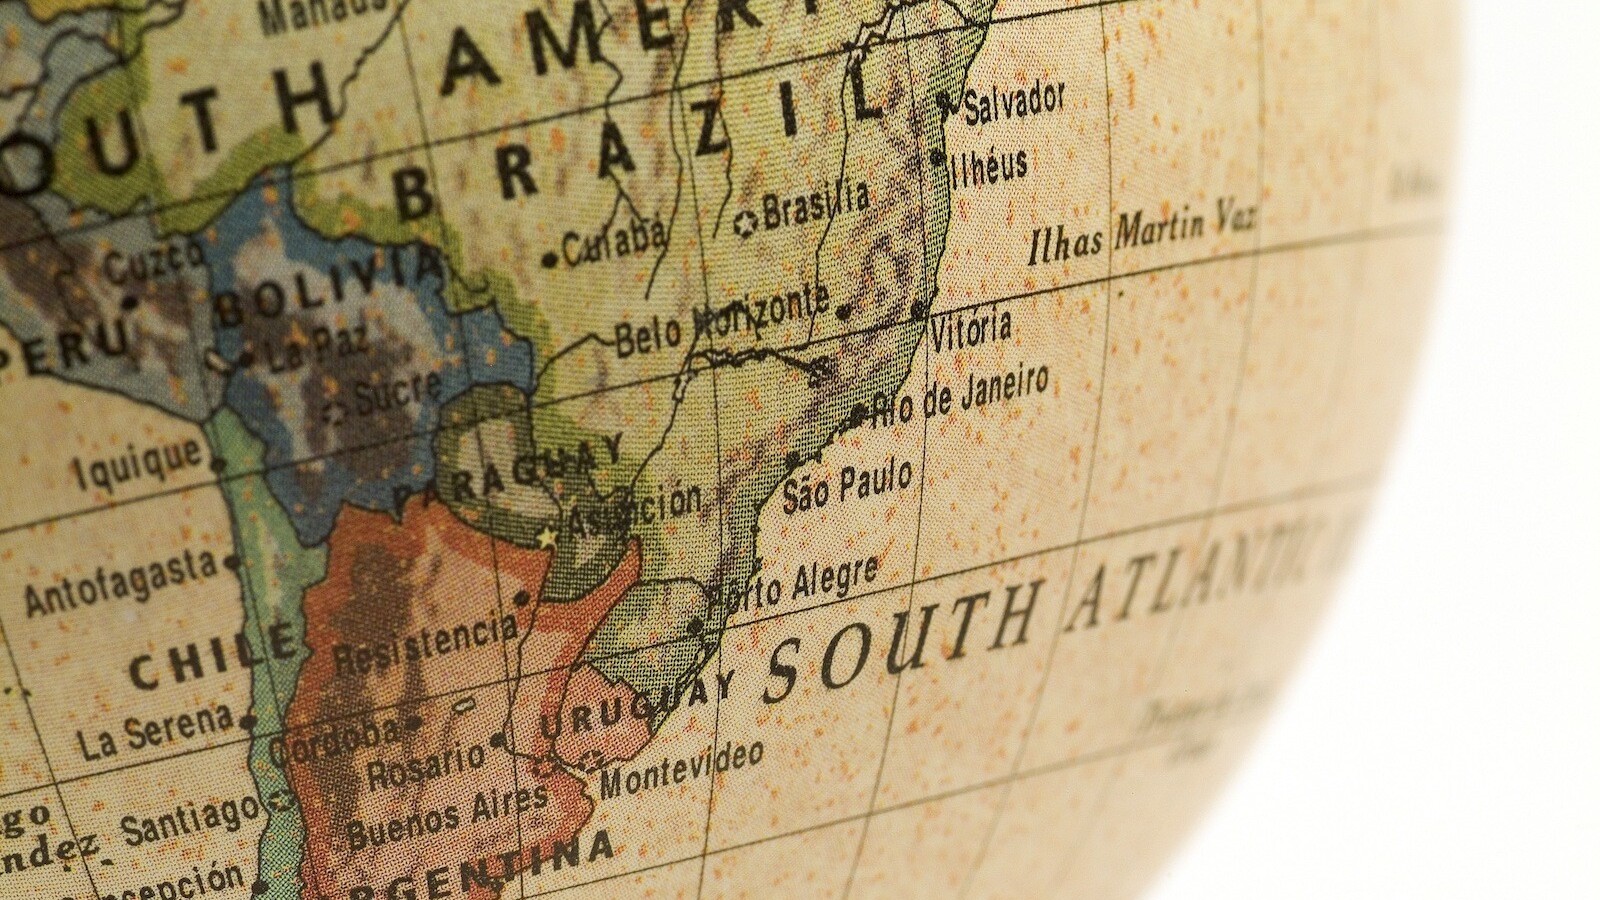 10 Latin American startups to look out for in 2013